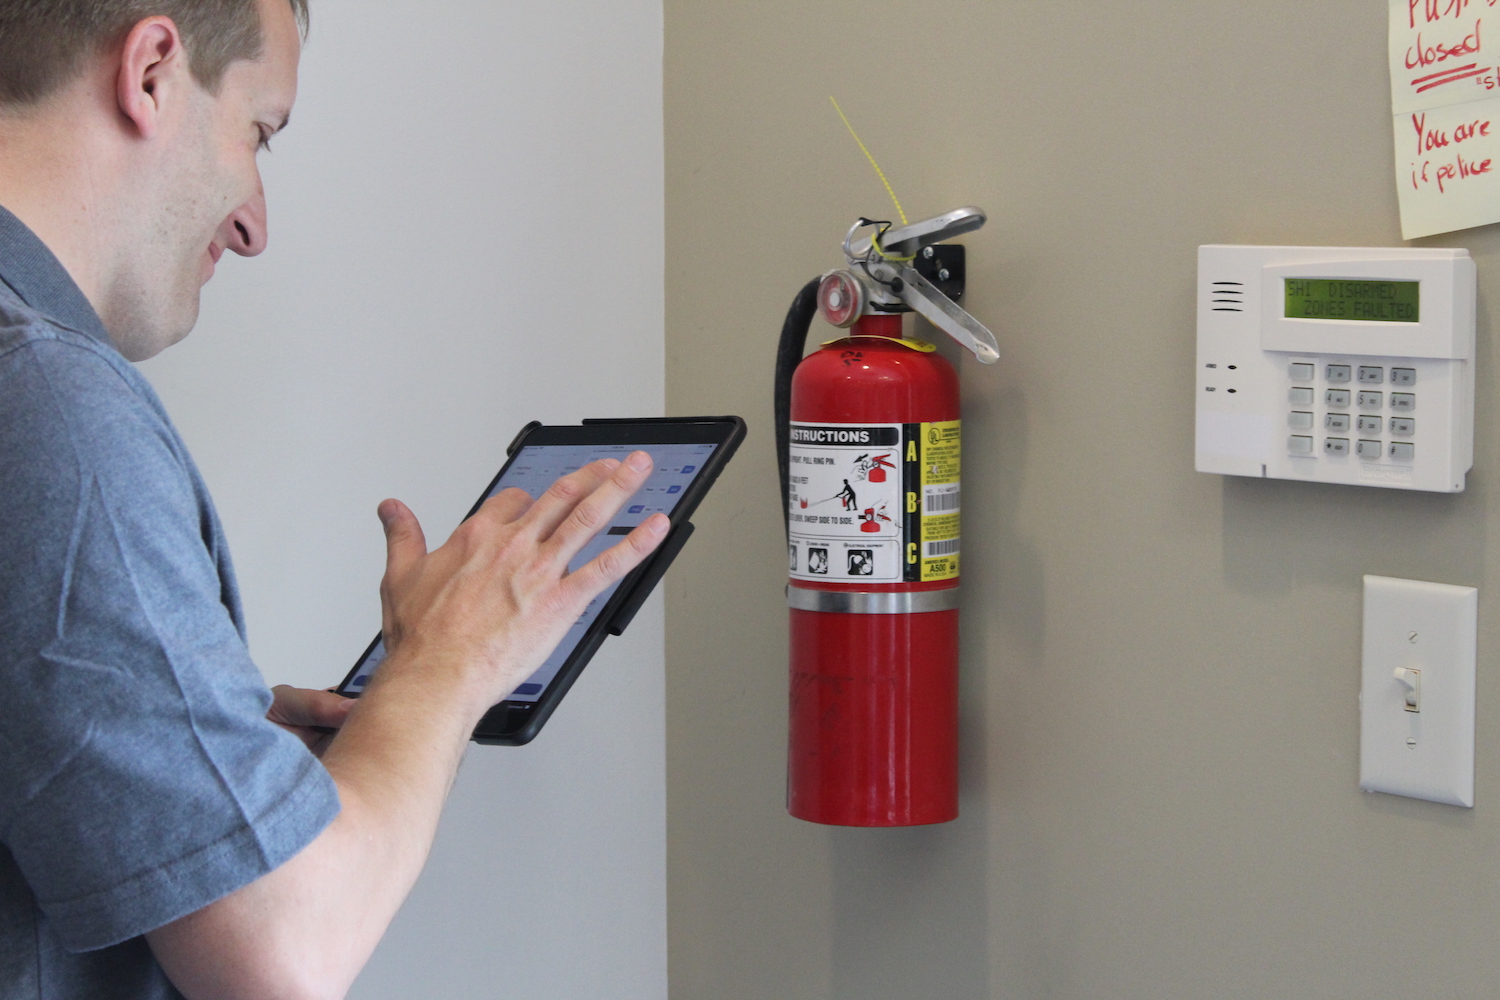 Man looking at Fire Inspection Software on Tablet, inspecting a fire extinguisher